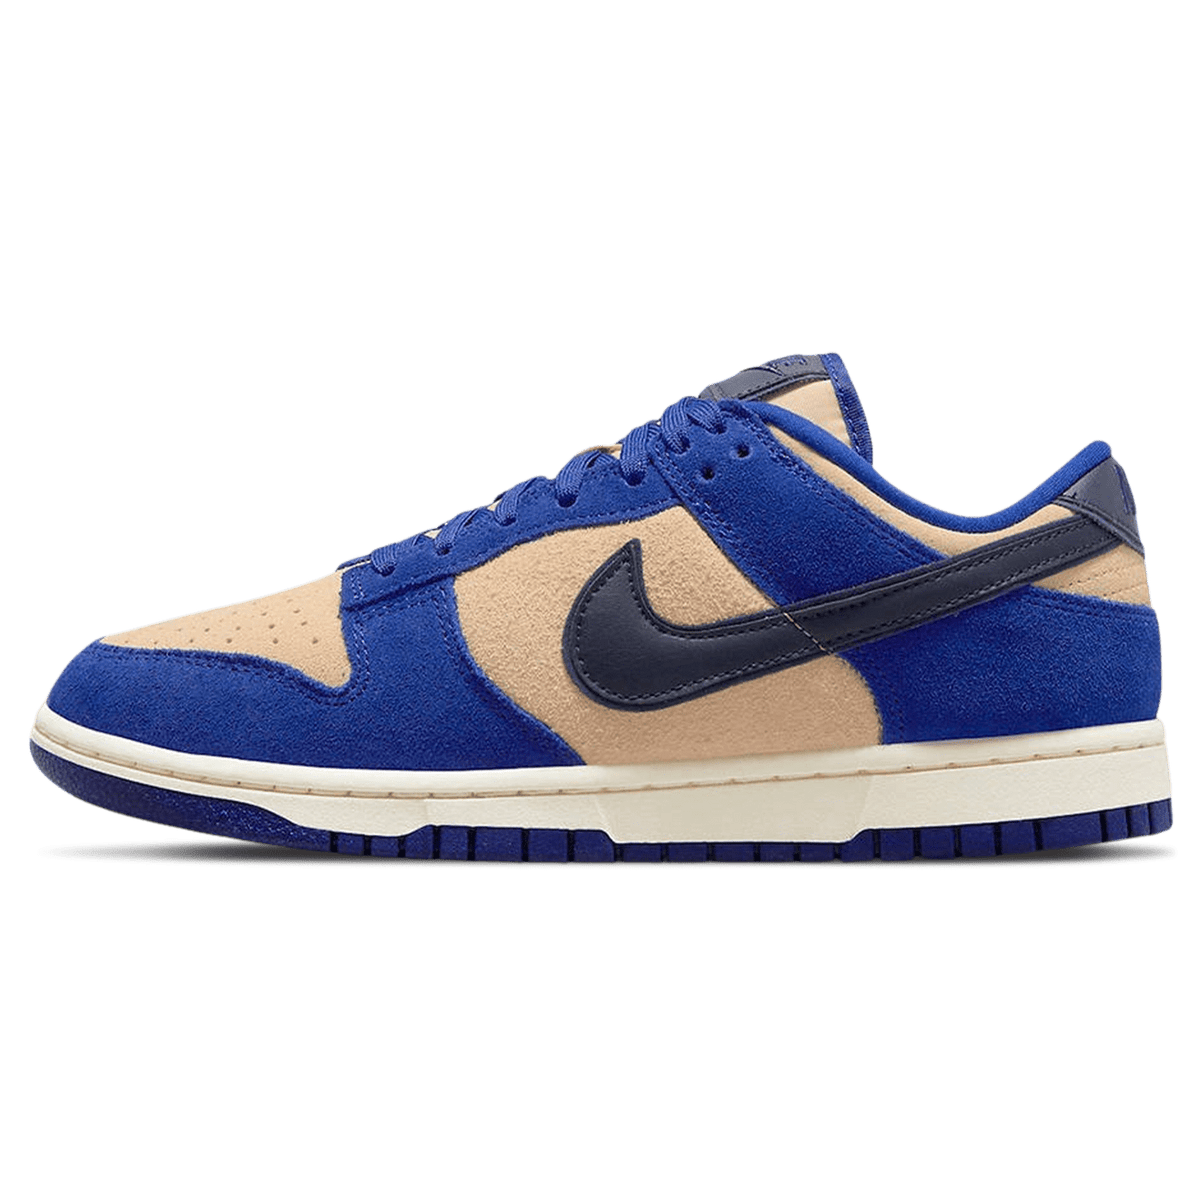 Nike Dunk Low Wmns LX 'Blue Suede' - Kick Game